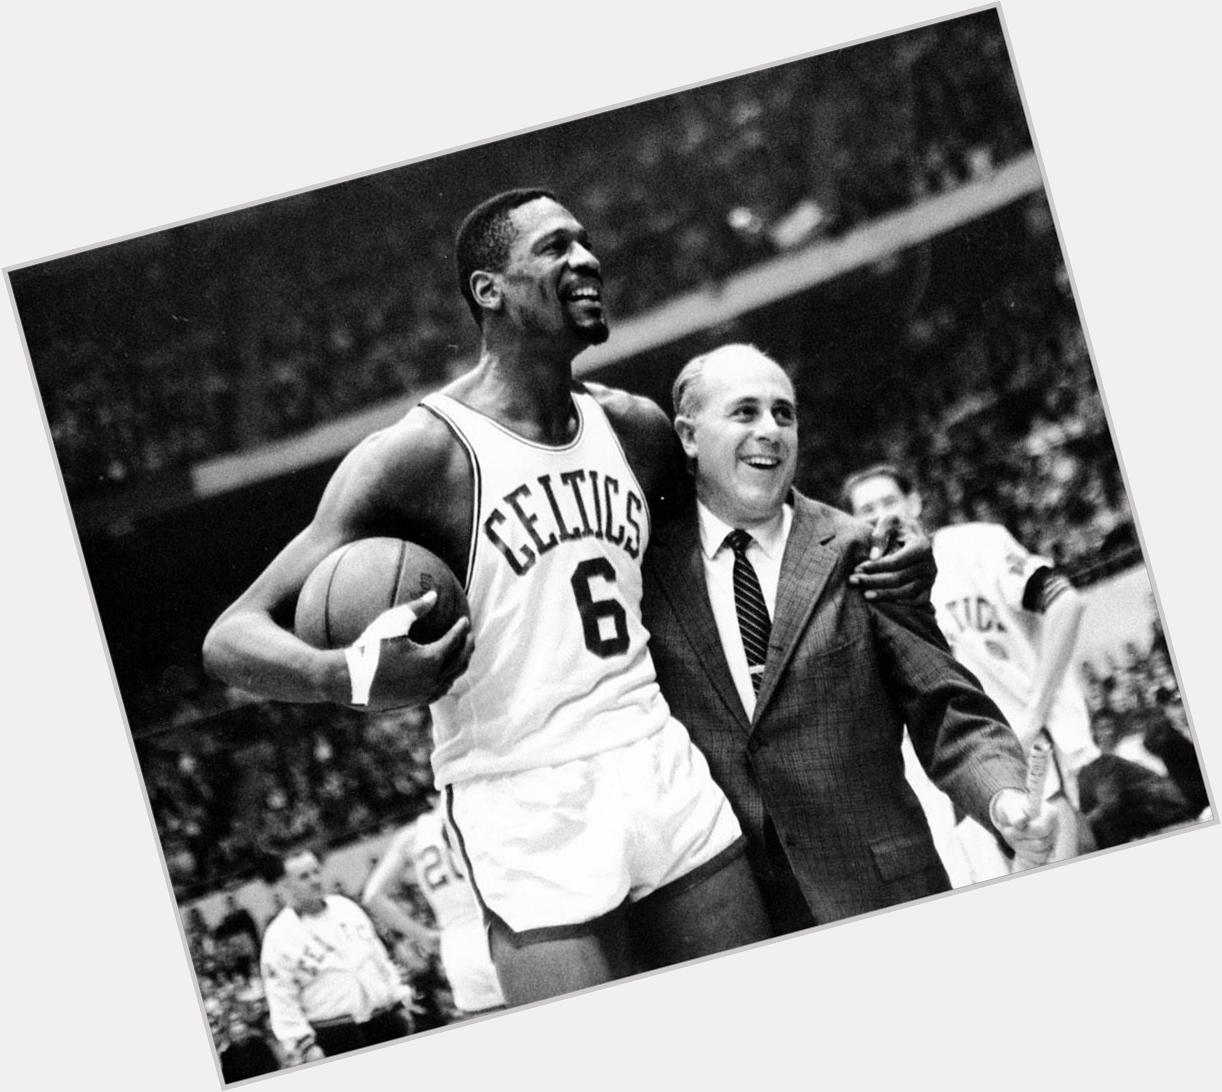 Happy birthday to the great Bill Russell!!!! 